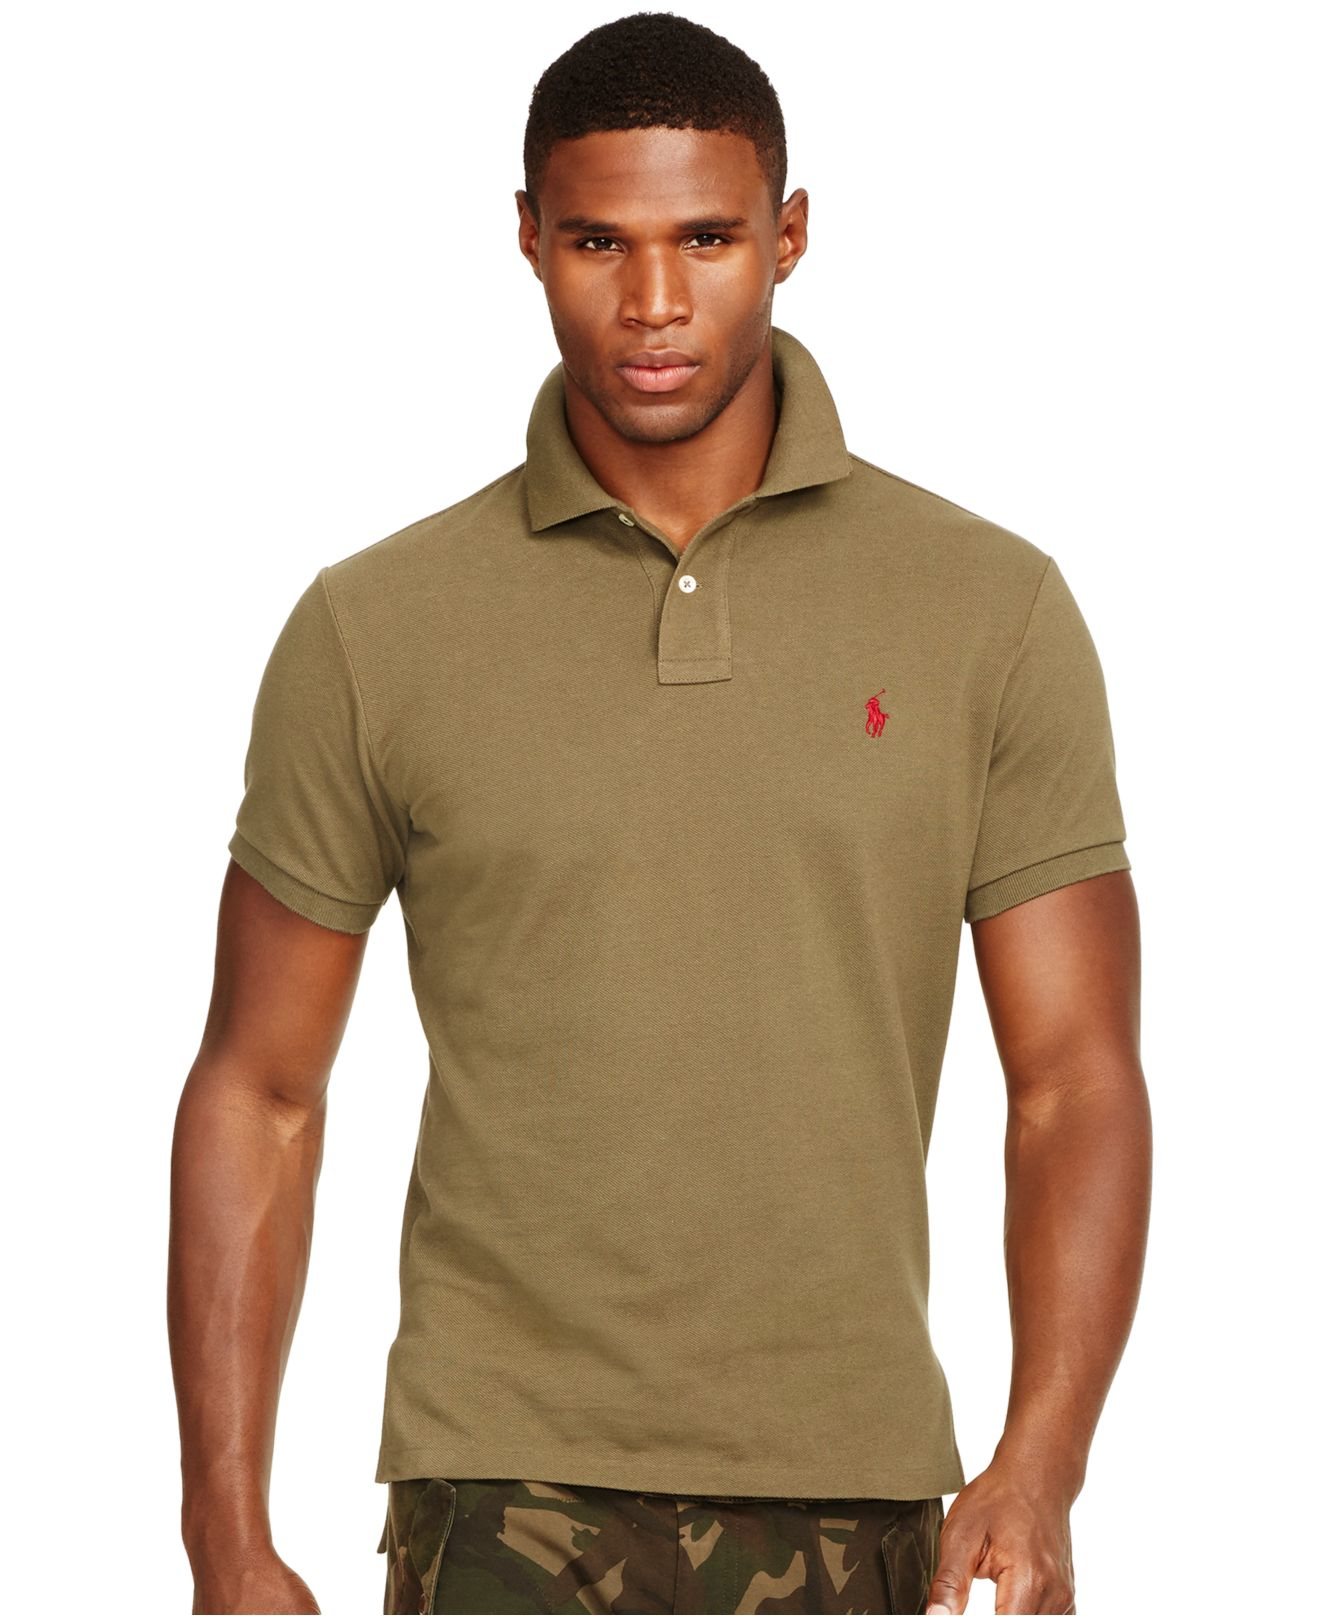 Polo Ralph Lauren Classic-fit Mesh Polo in Green for Men - Lyst